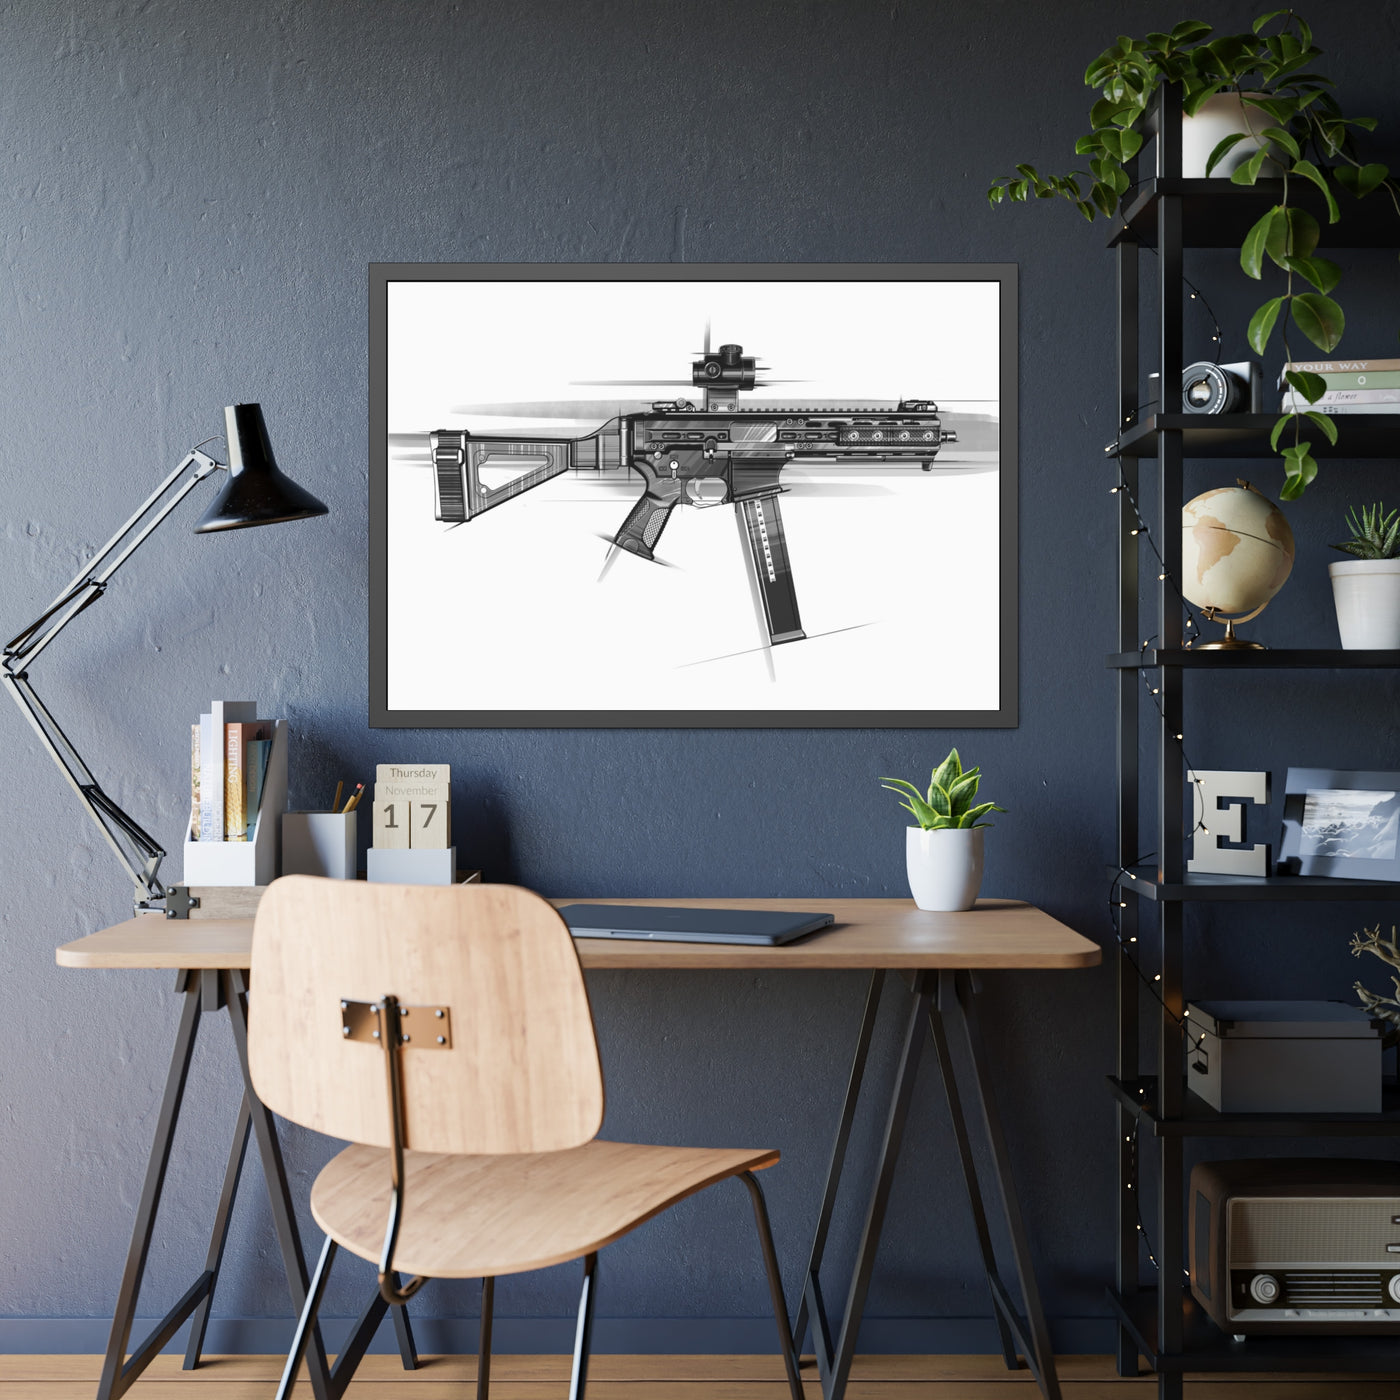 .45 Cal SMG Painting - Black Frame - Value Collection